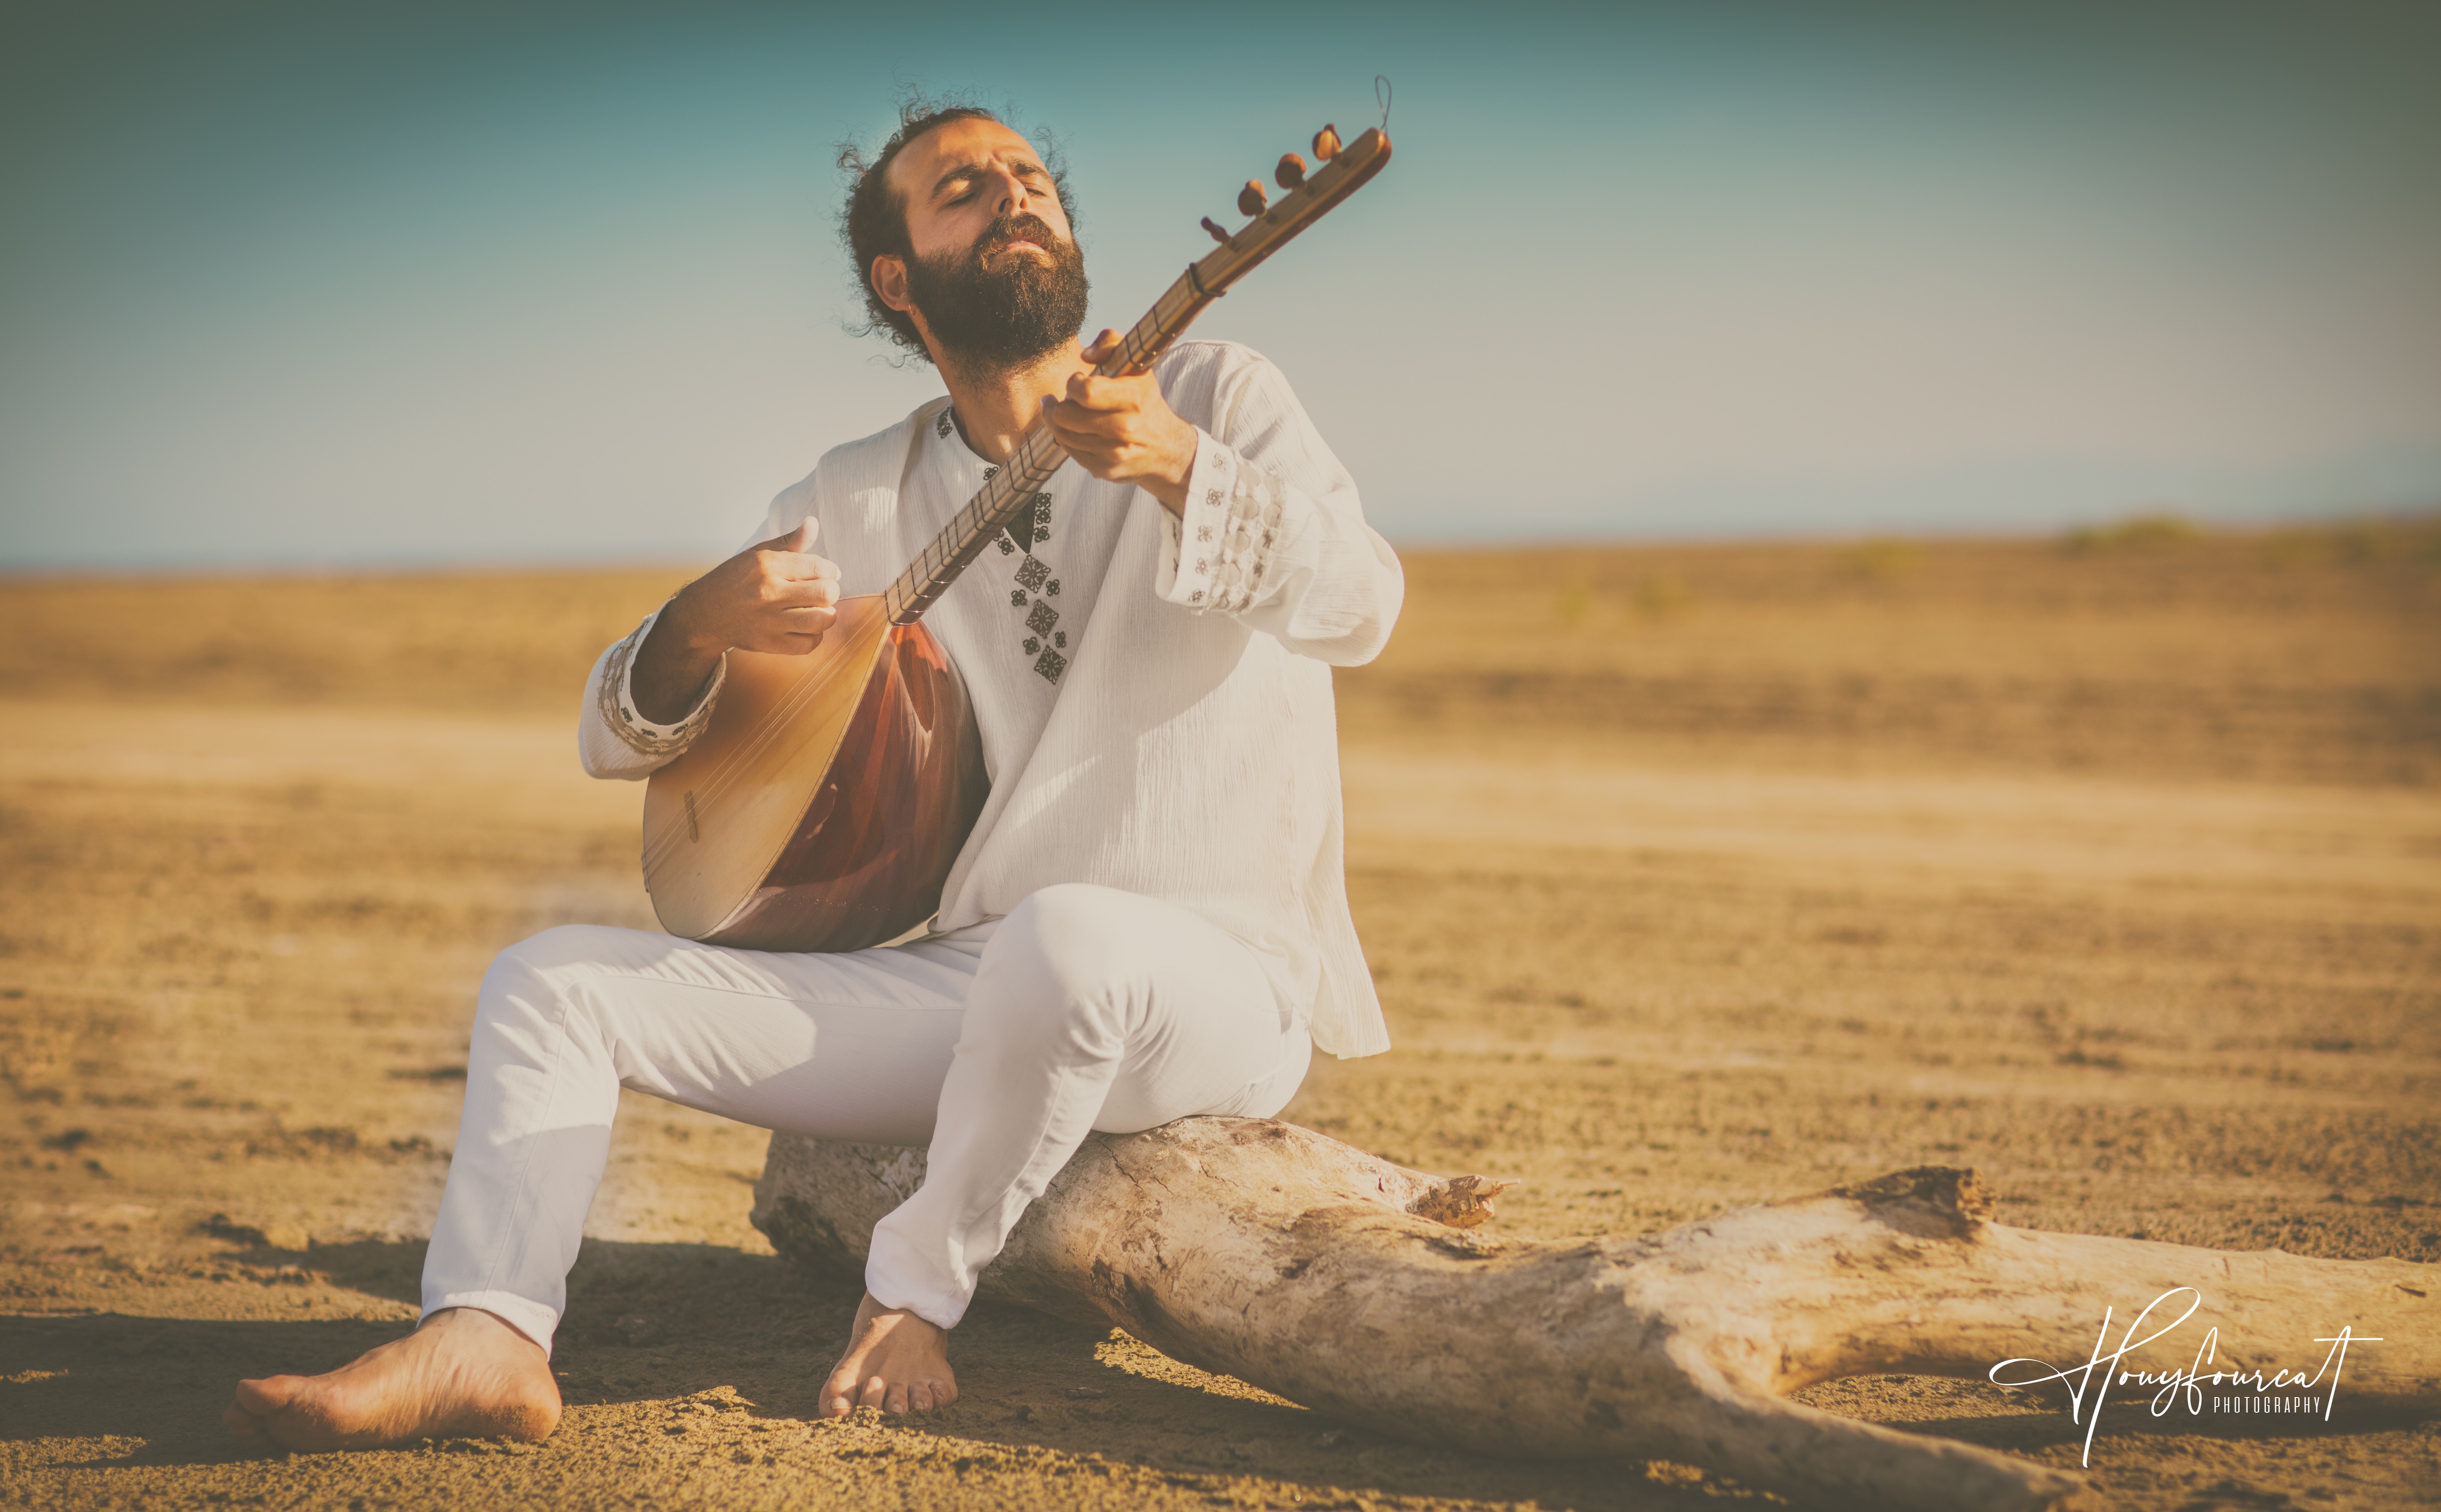 Musician dressed up in white and playing an instrument